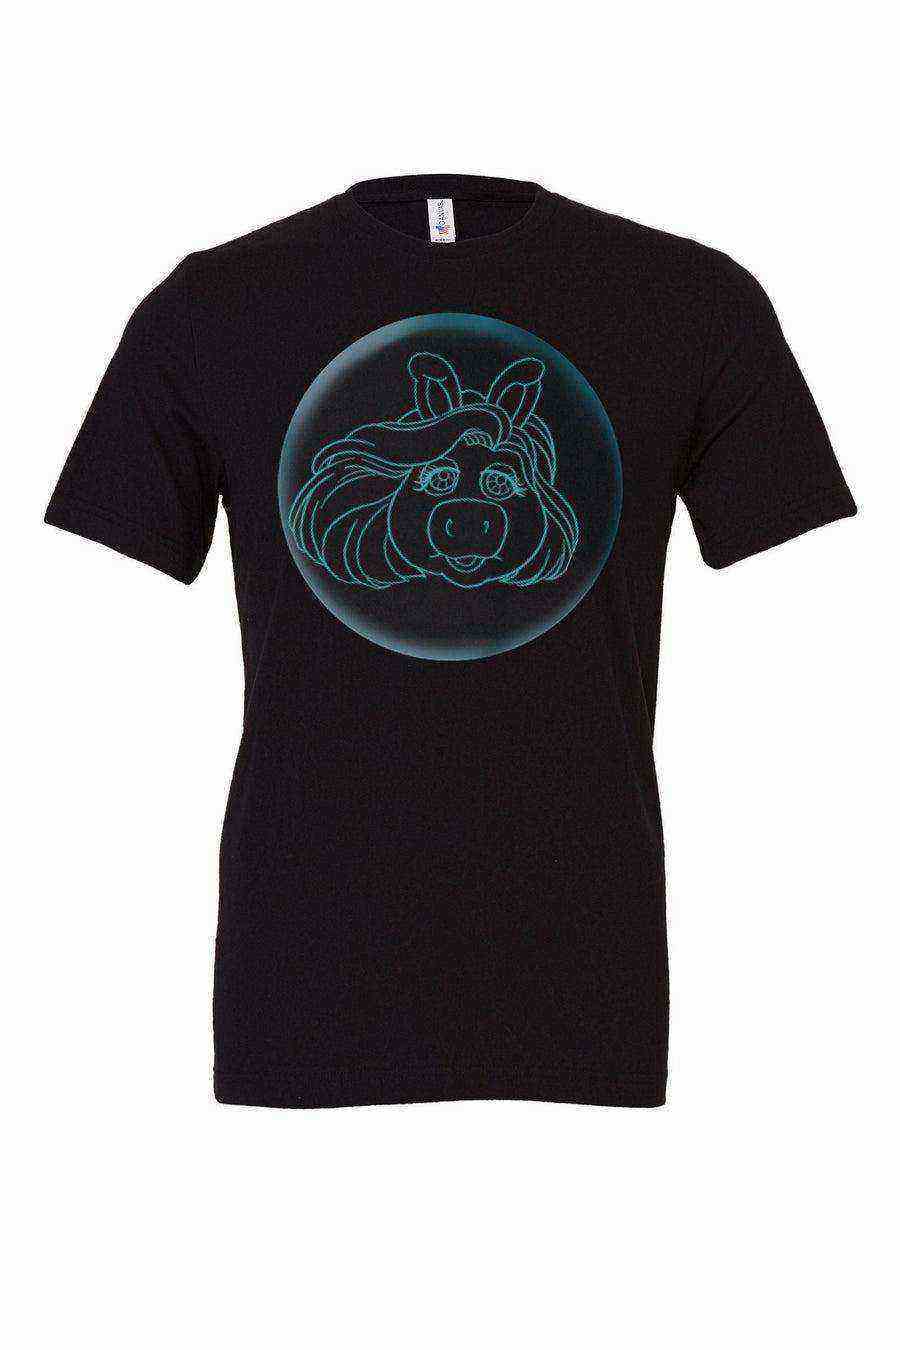 Youth | Haunted Mansion Madame Pig Shirt | Madame Leota | Muppets - Dylan's Tees